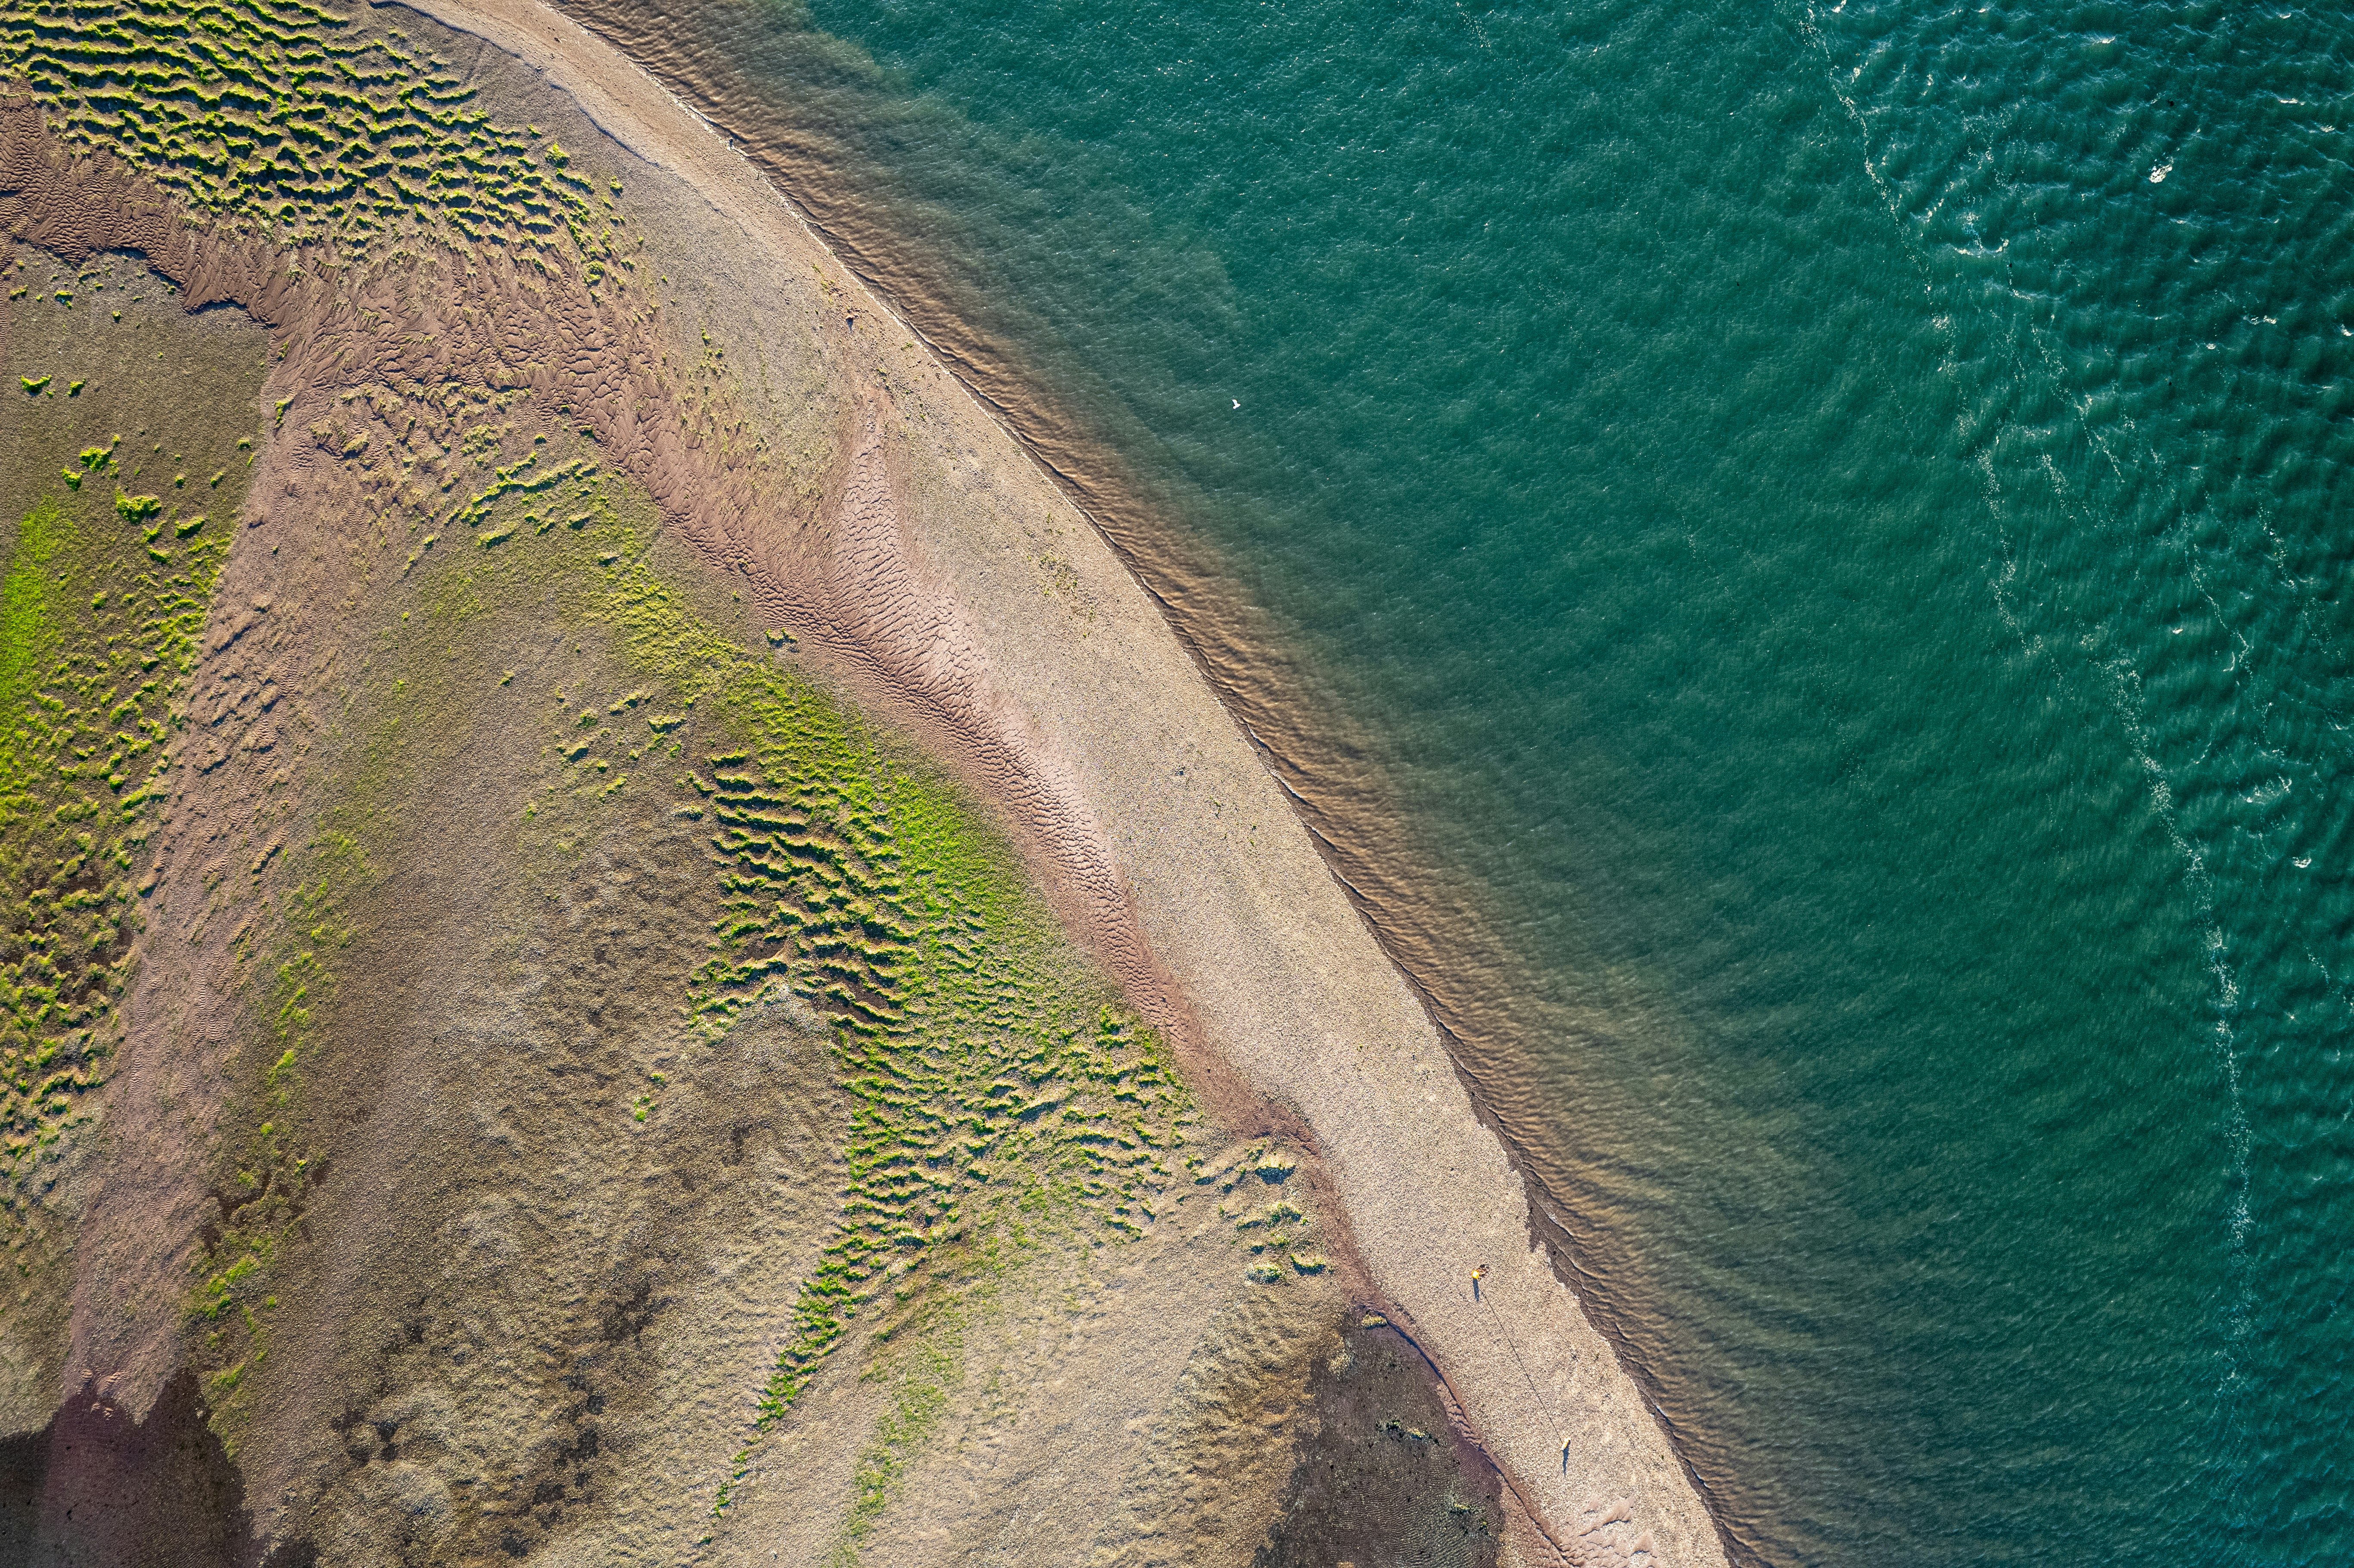 Aerial view of the Teign near Teignmouth at low tide showing the sandy shore and blue water.